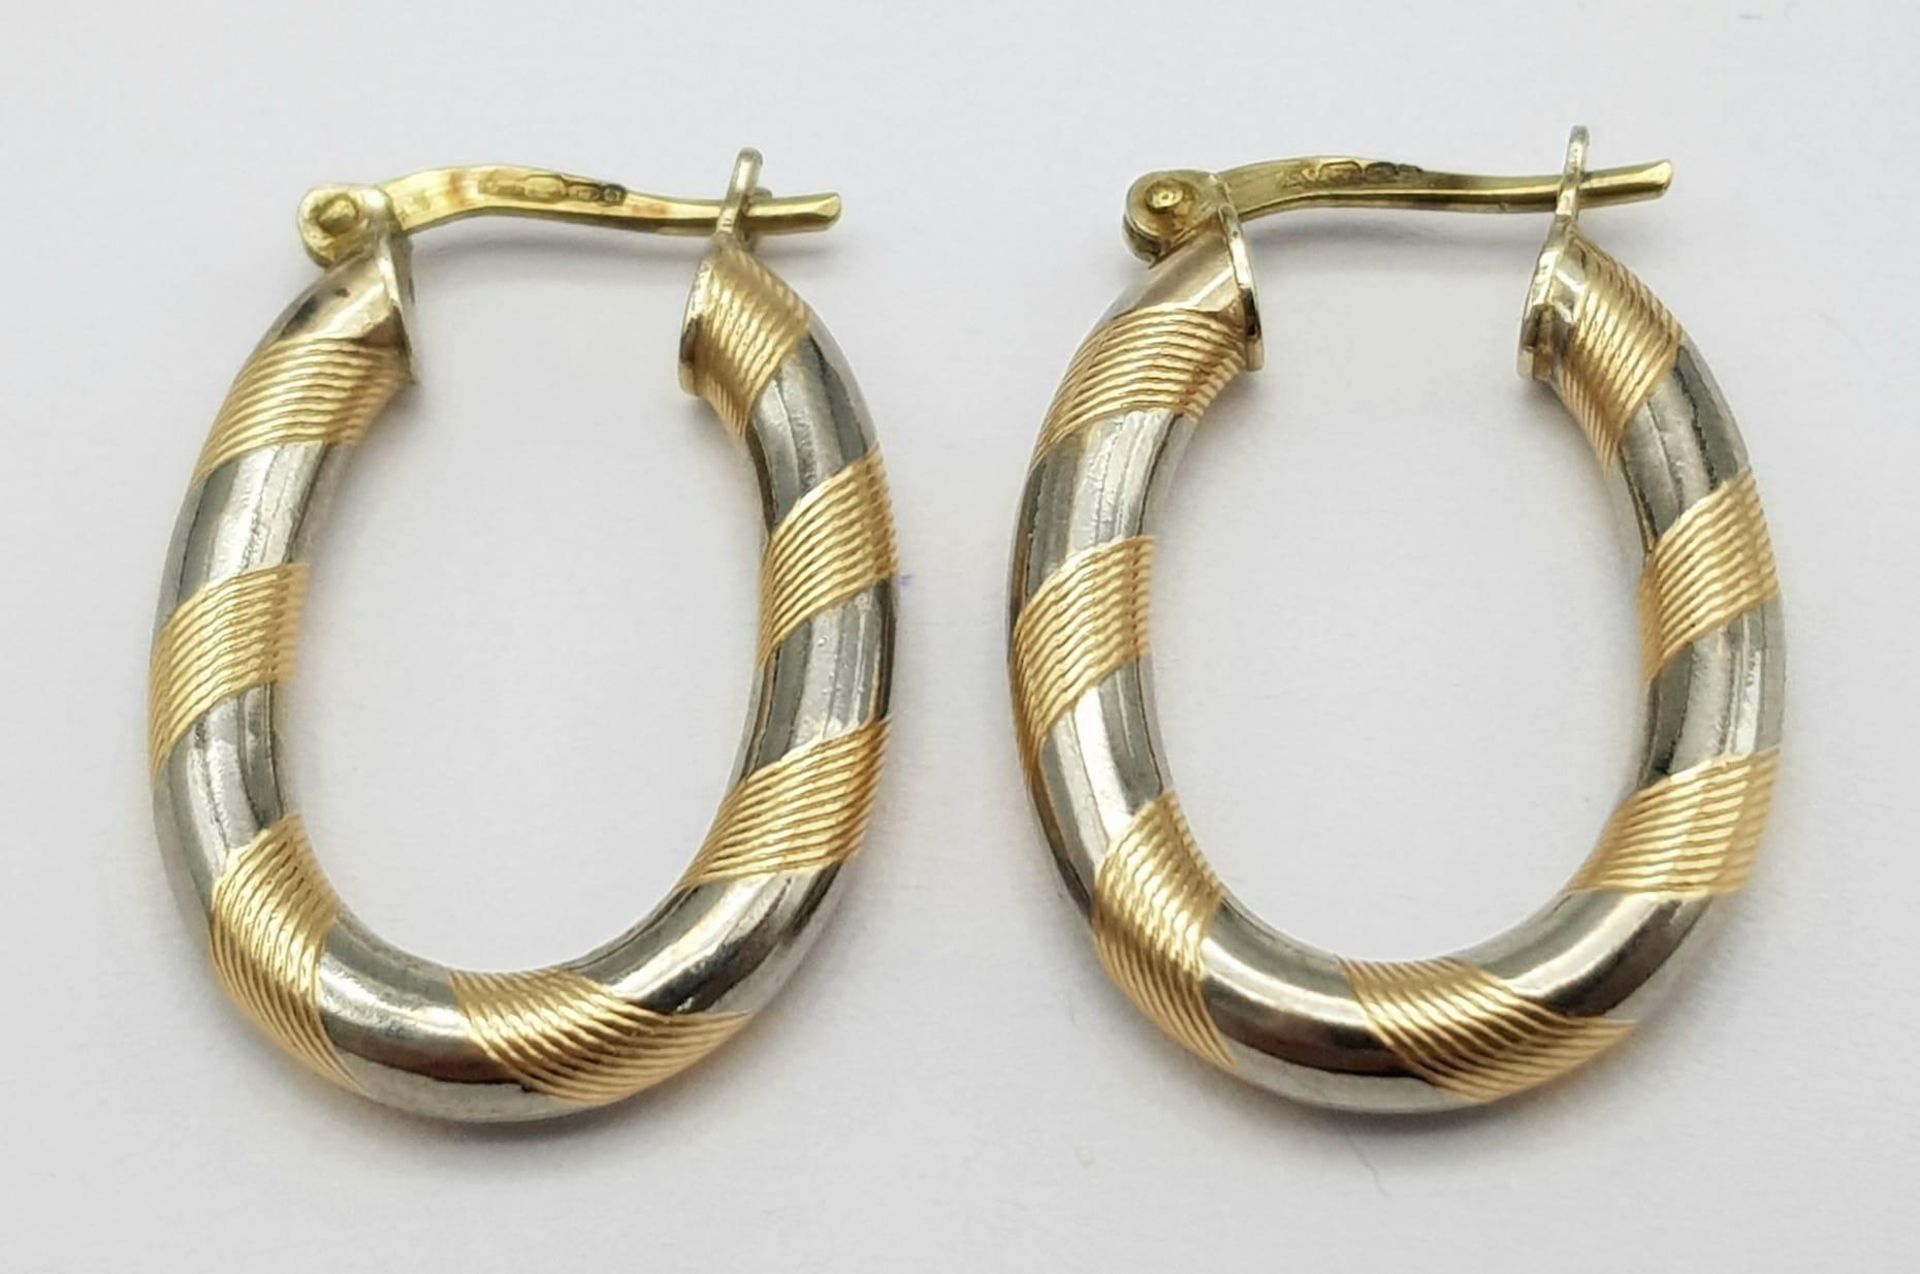 A PRETTY PAIR OF 9K 2 COLOUR GOLD OVAL HOOP EARRINGS, WEIGHT 2.1G - Image 2 of 4